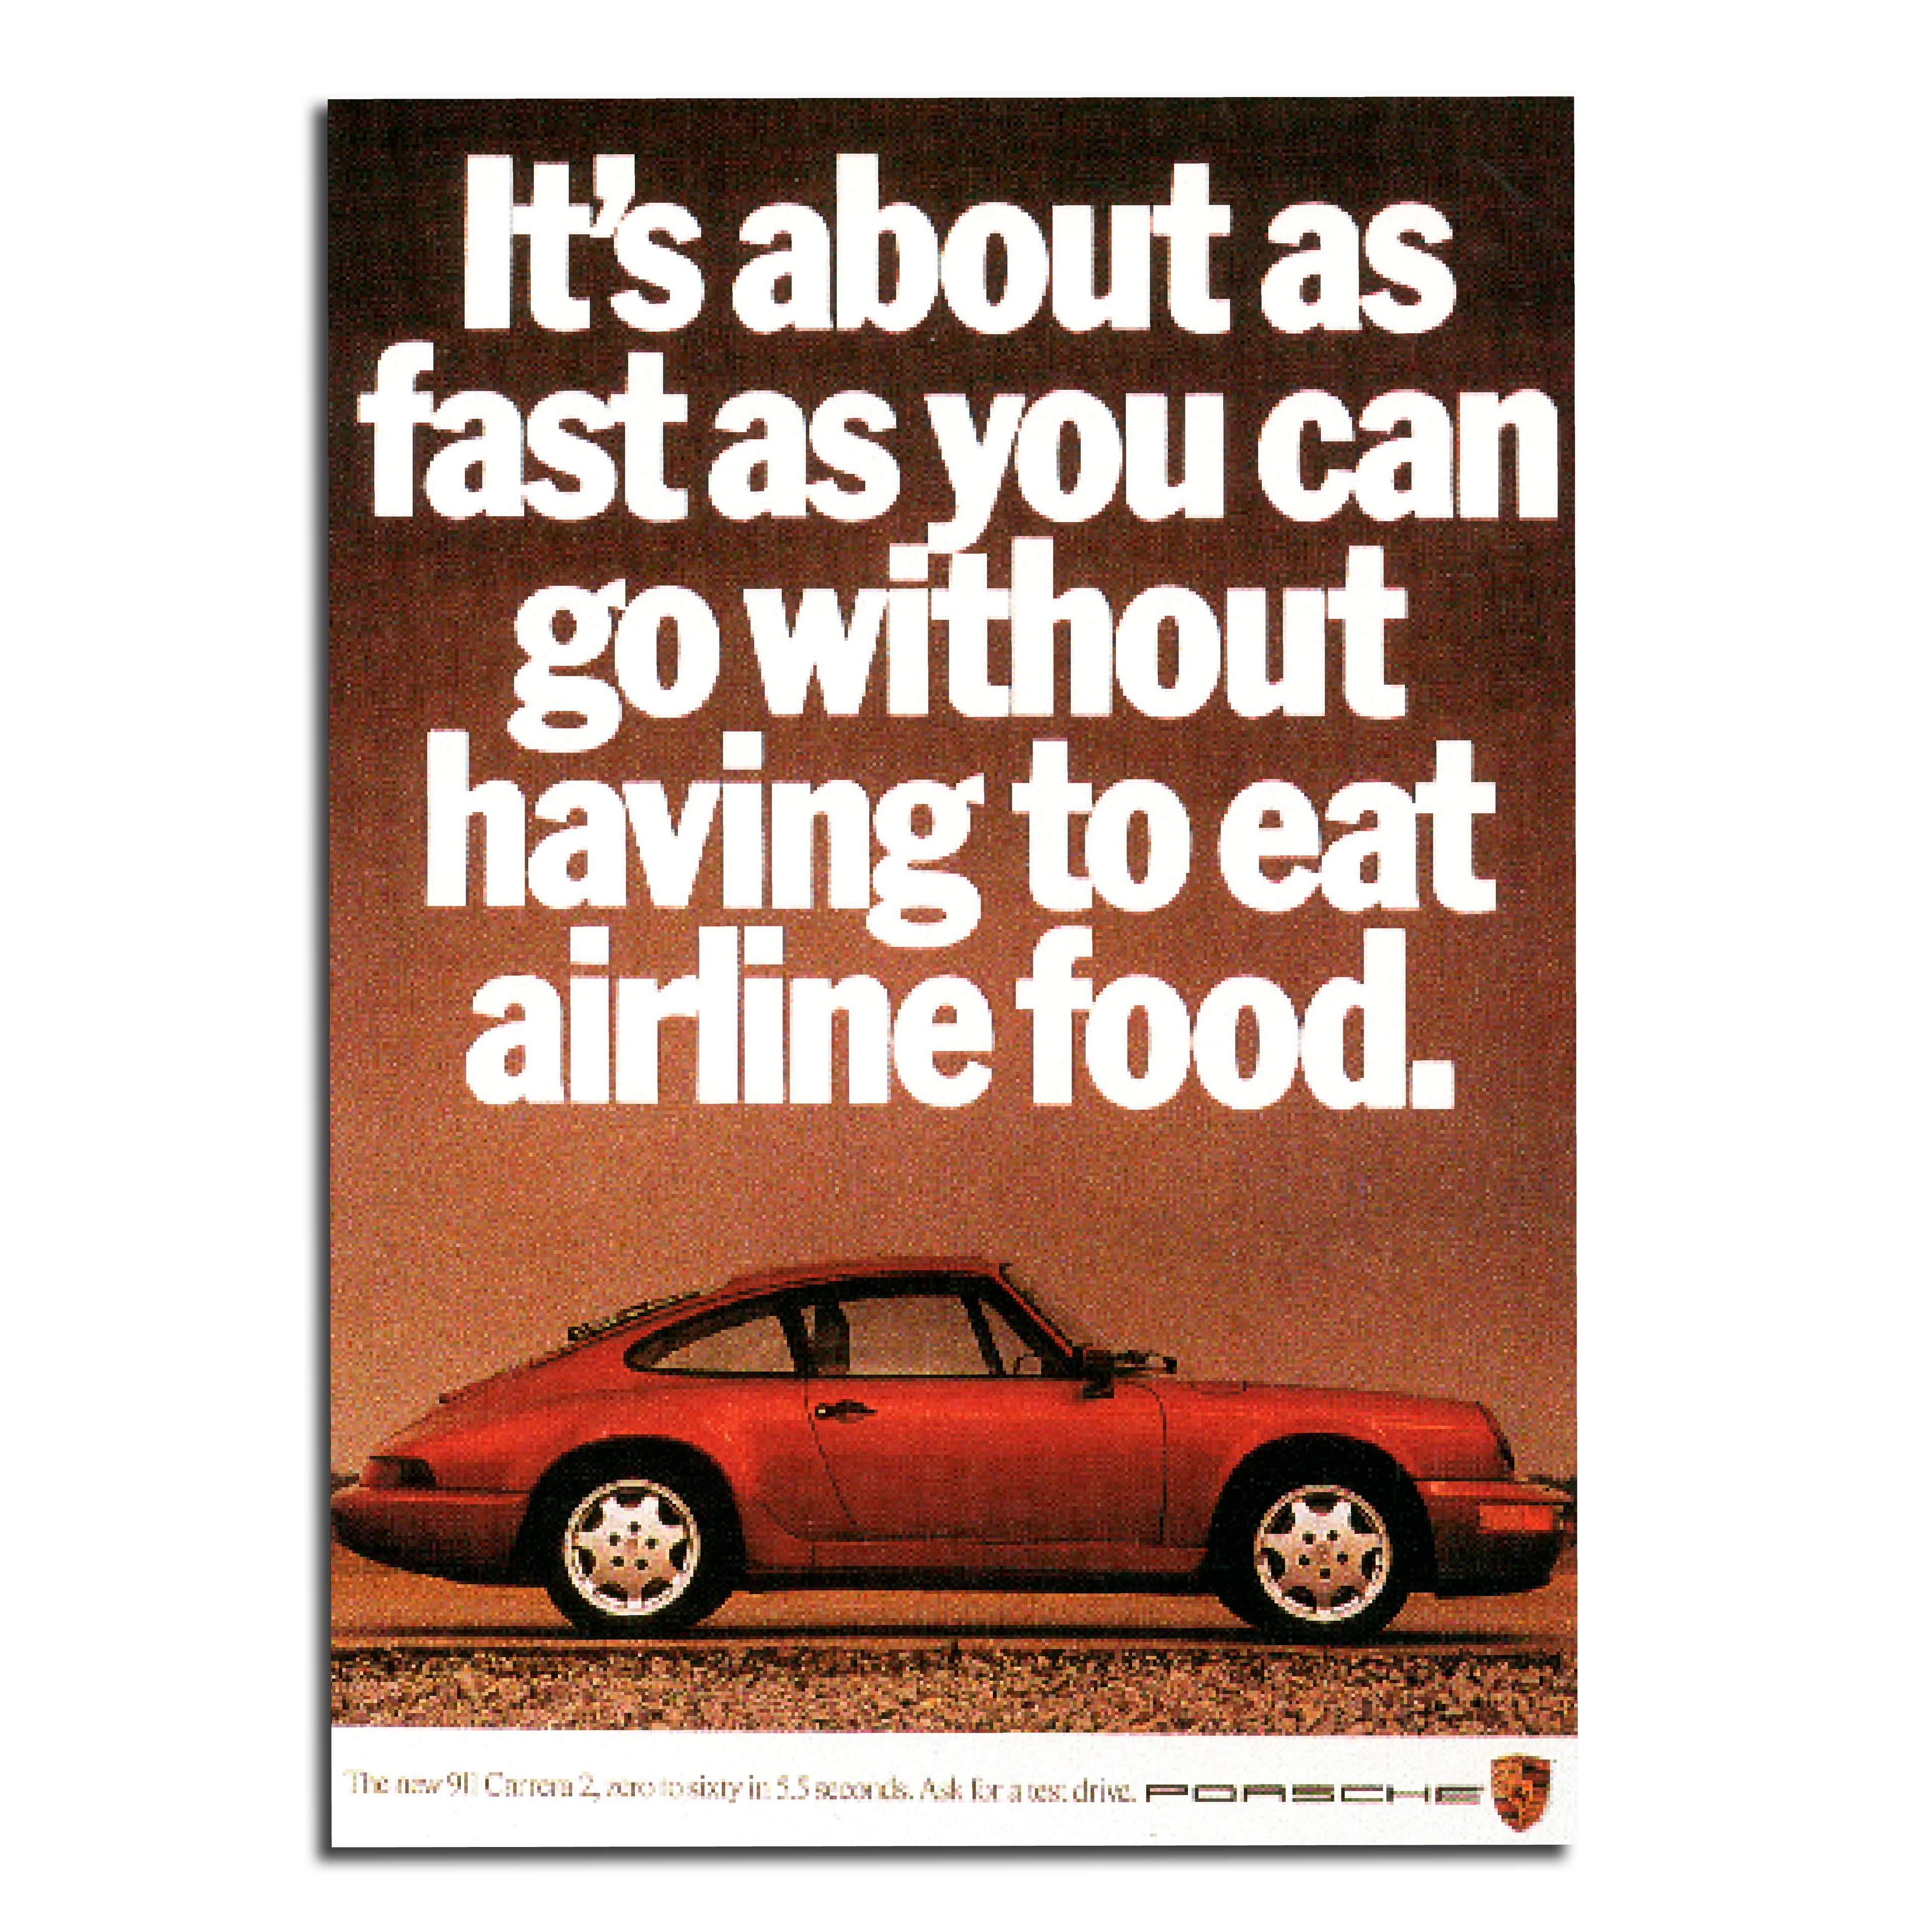 Photo of a Porsche with the headline about going fast without having to eat airline food.